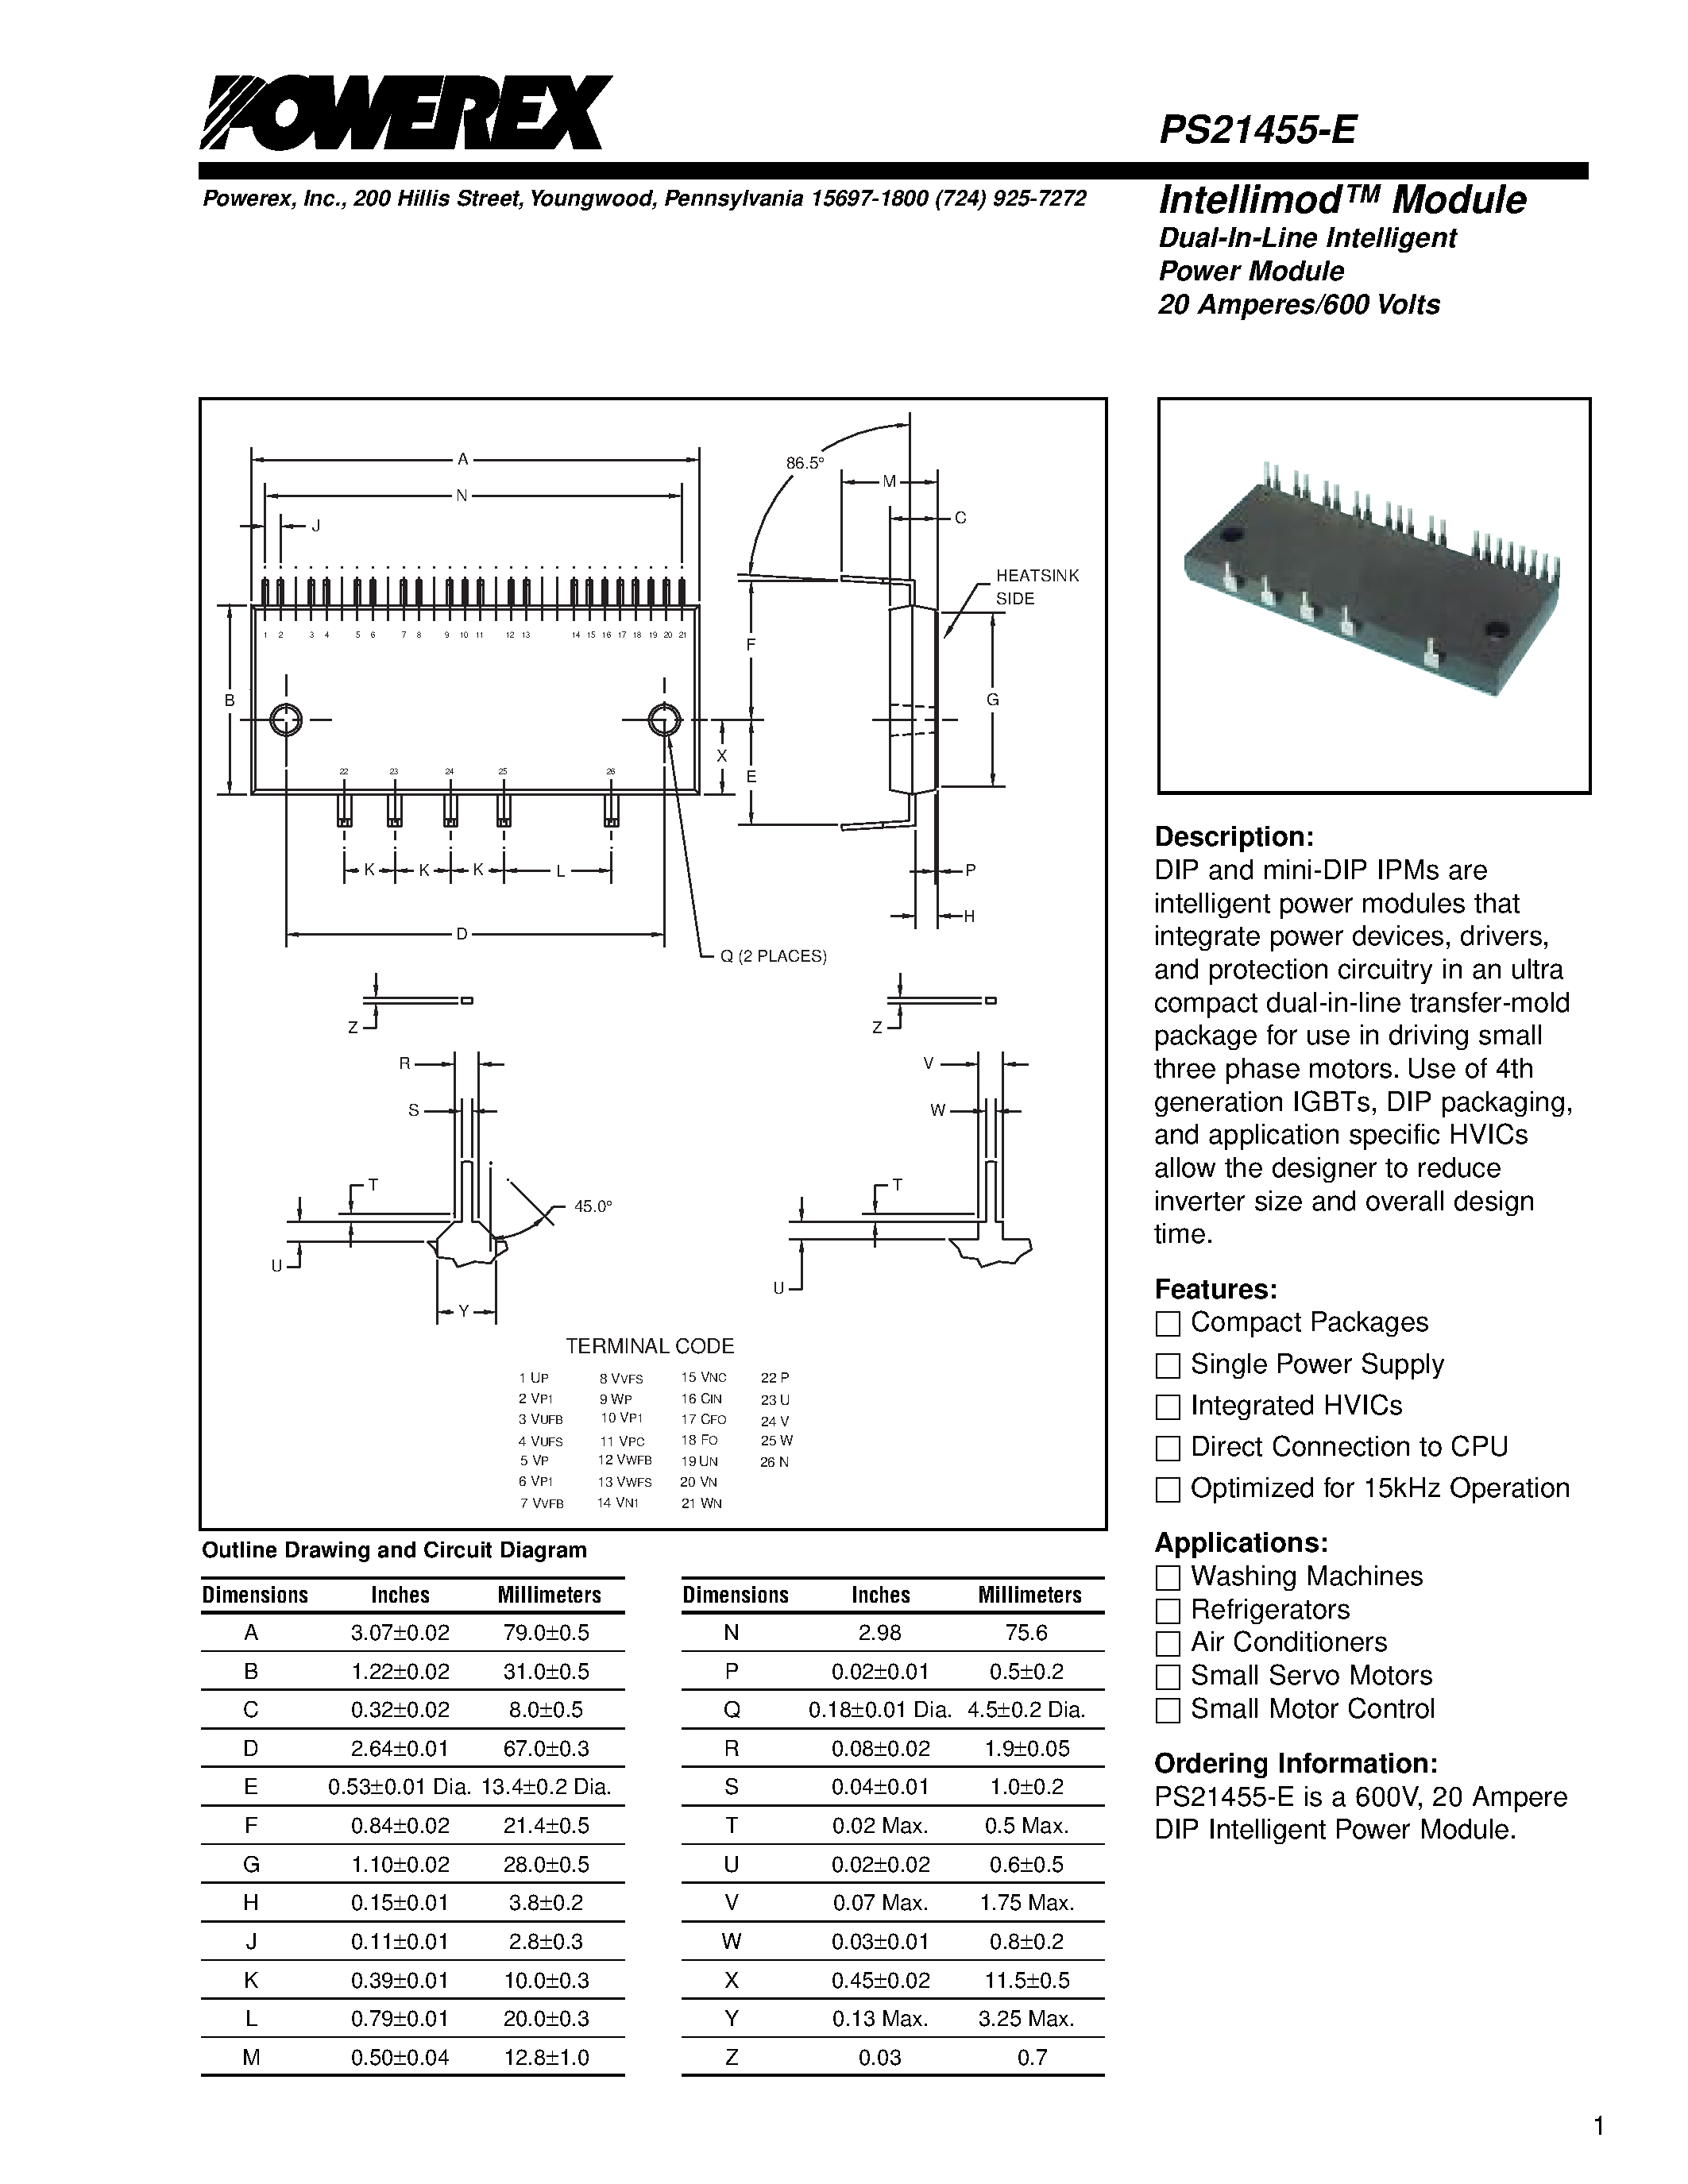 Datasheet PS21455-E - Intellimod Module Dual-In-Line Intelligent Power Module (20 Amperes/600 Volts) page 1